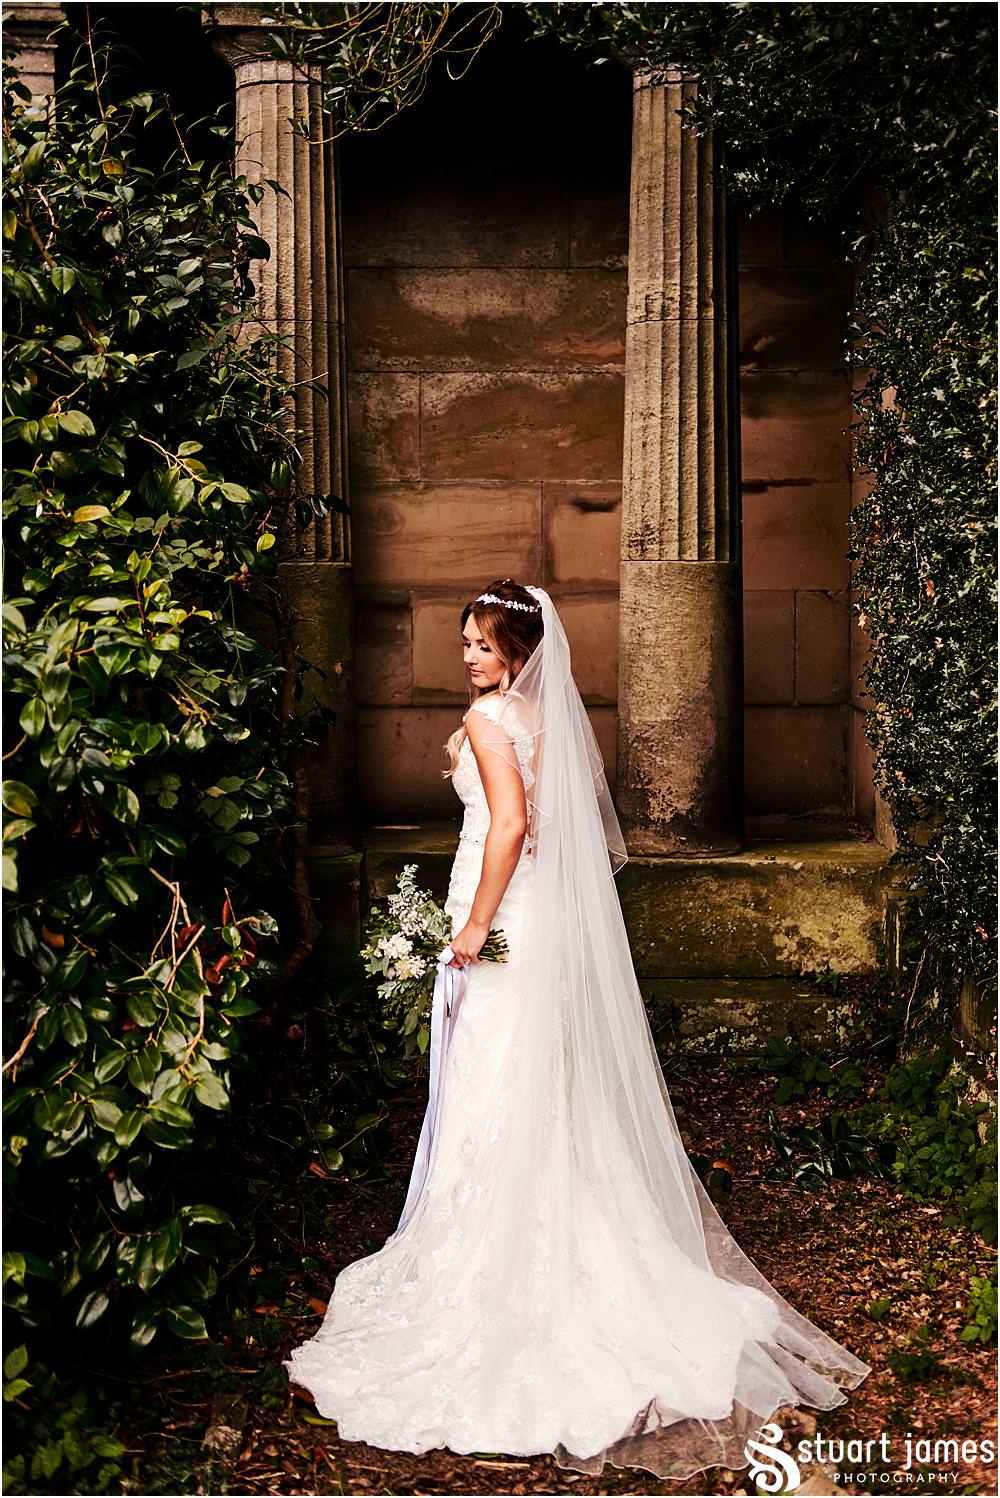 Beautiful portraits of the Bride and Groom at Bishton Hall in Stafford by Documentary Wedding Photographer Stuart James